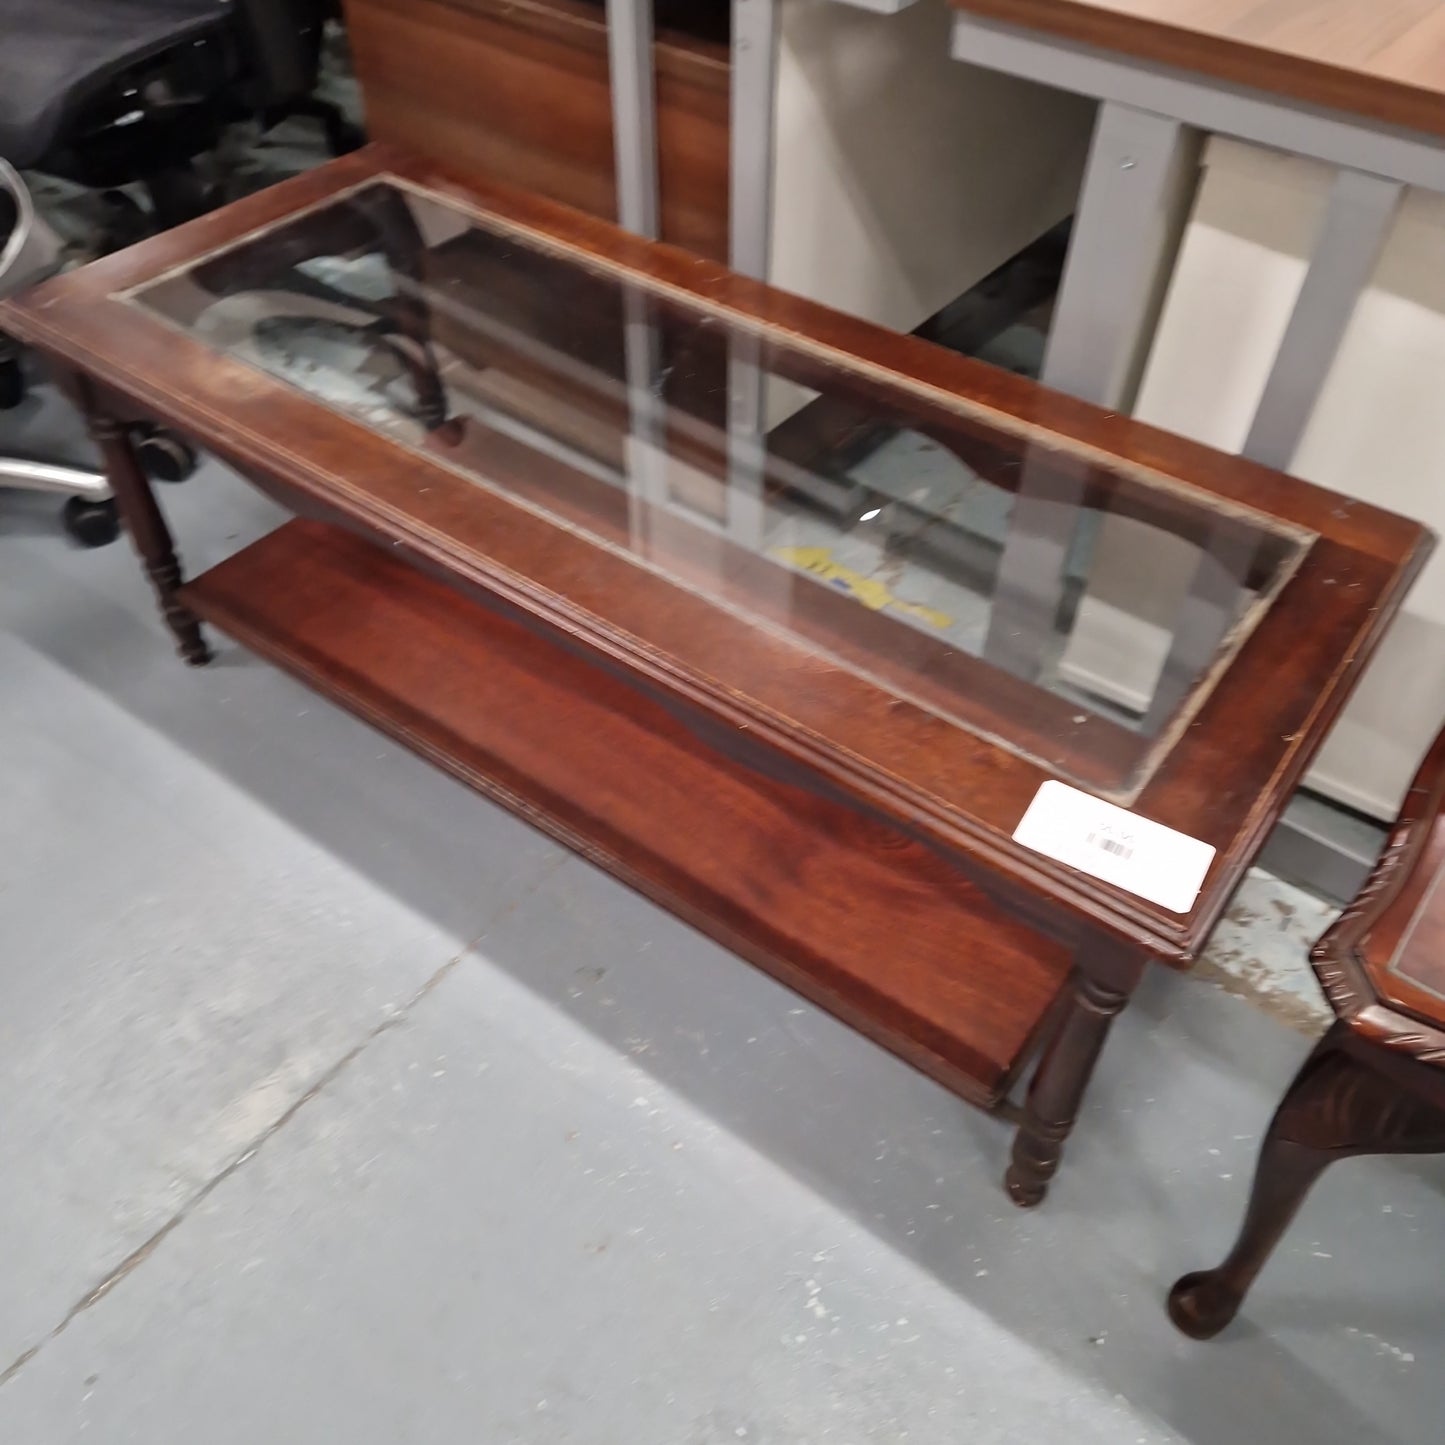 Mahogany coffee table with glass centre top